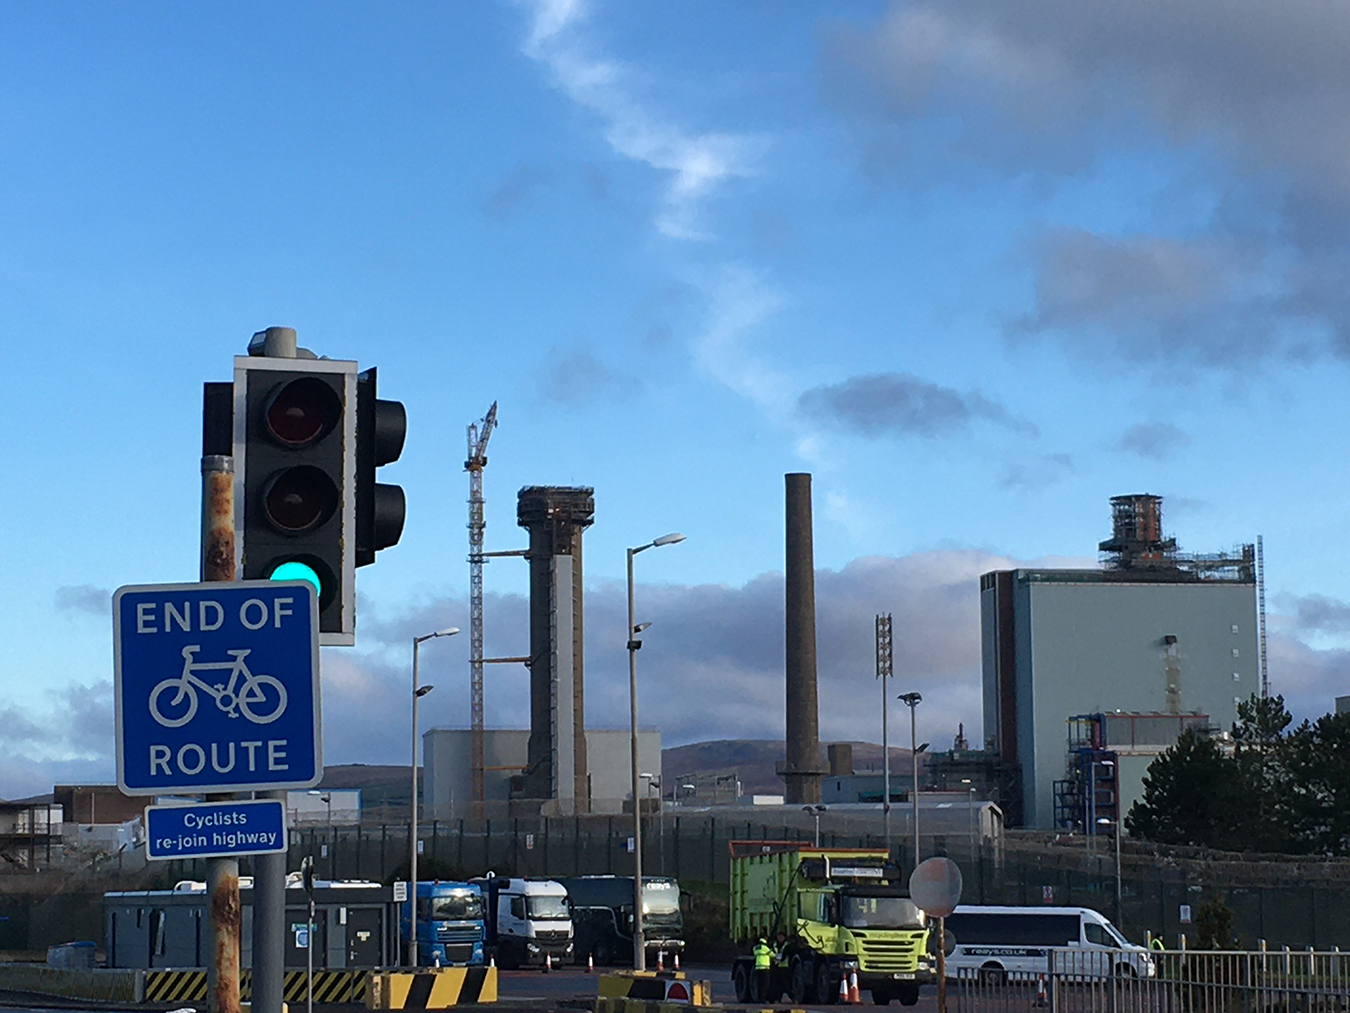 Legacy facilities on Sellafield site in the process of being decommissioned, close to the main gate where trucks are inspected before they are allowed to enter the site, 2019. On the left (with the crane perched above it) is the Pile One chimney where the 1957 Windscale fire occurred. Photo by Petra Tjitske Kalshoven.